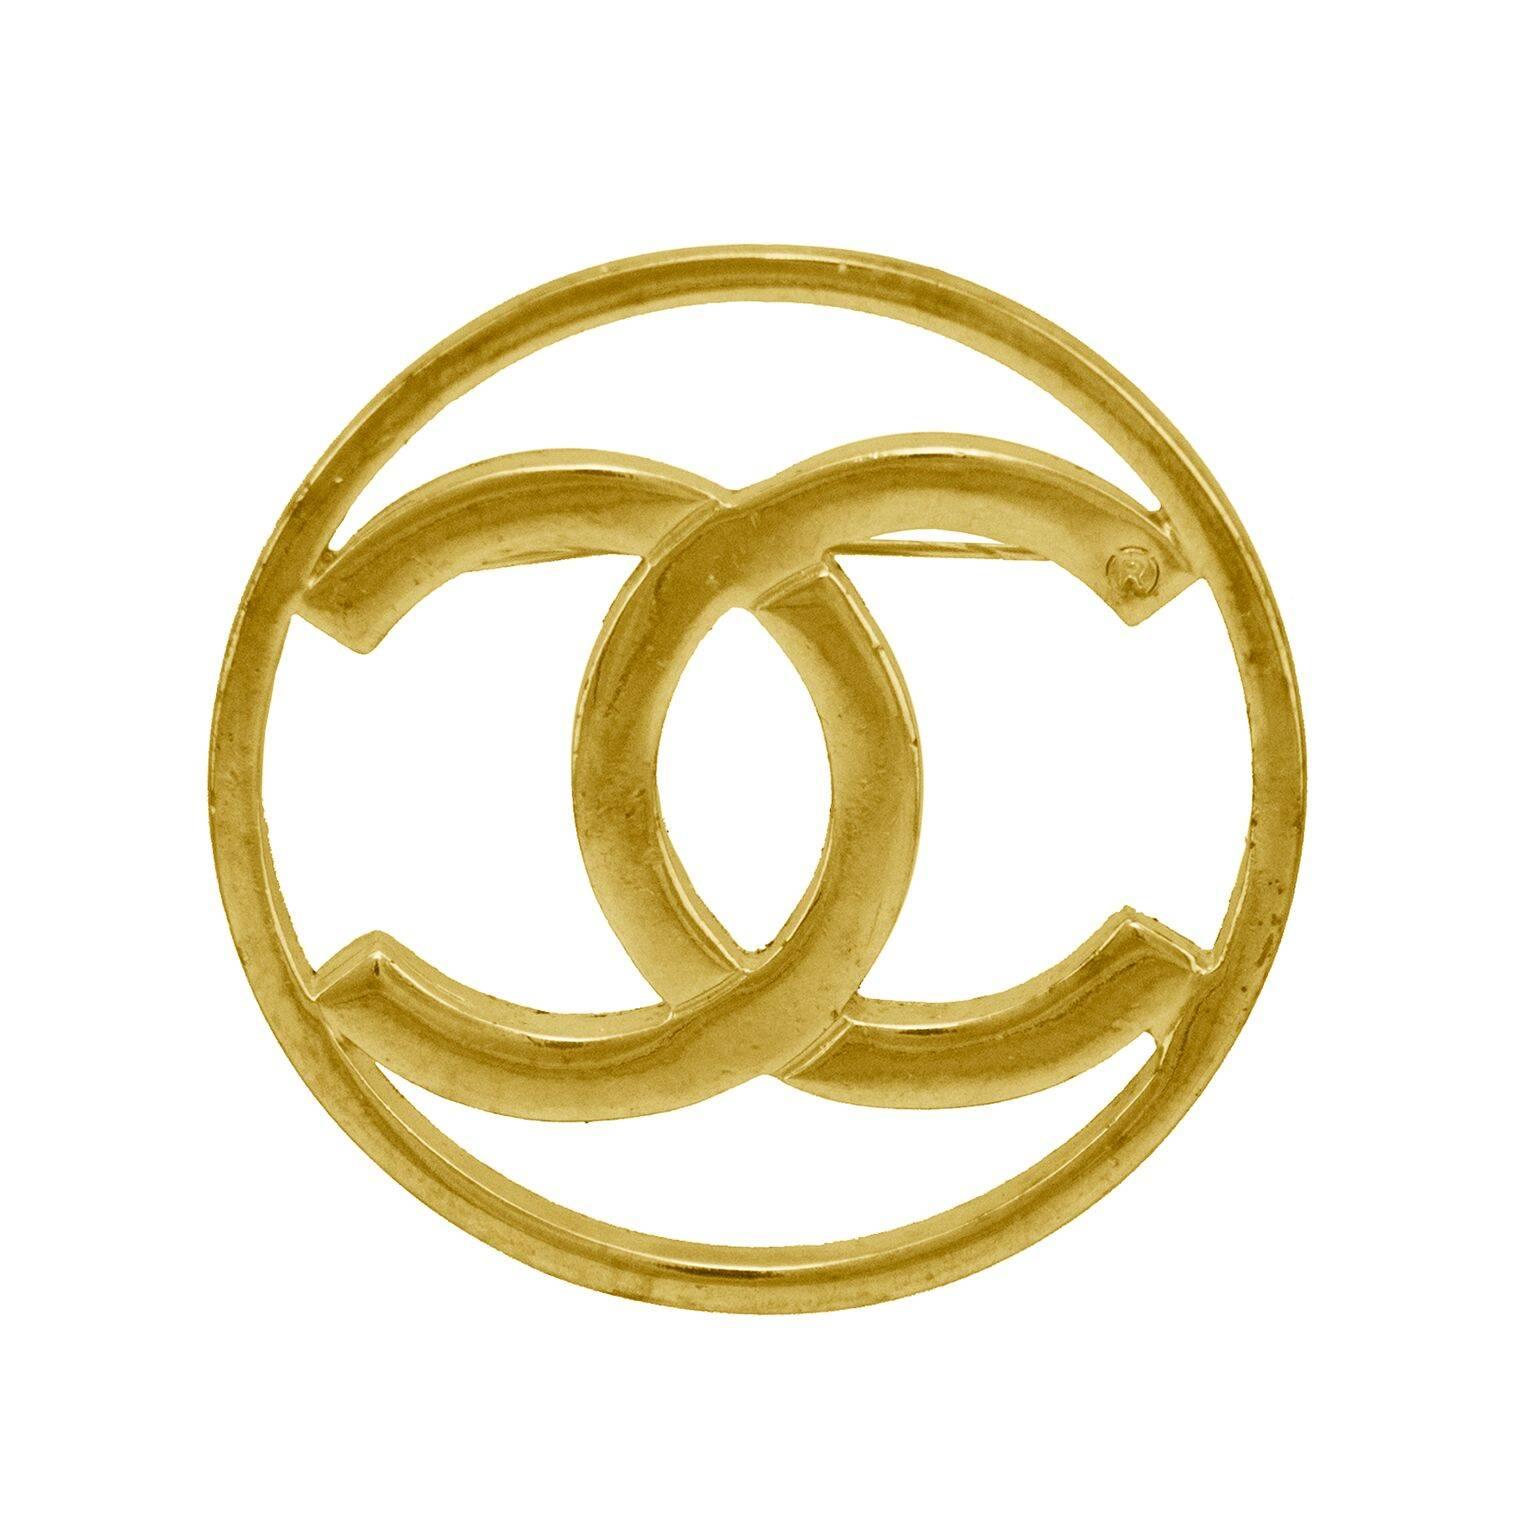 Early 1980s Chanel 14kt Filled Gold CC logo Pin